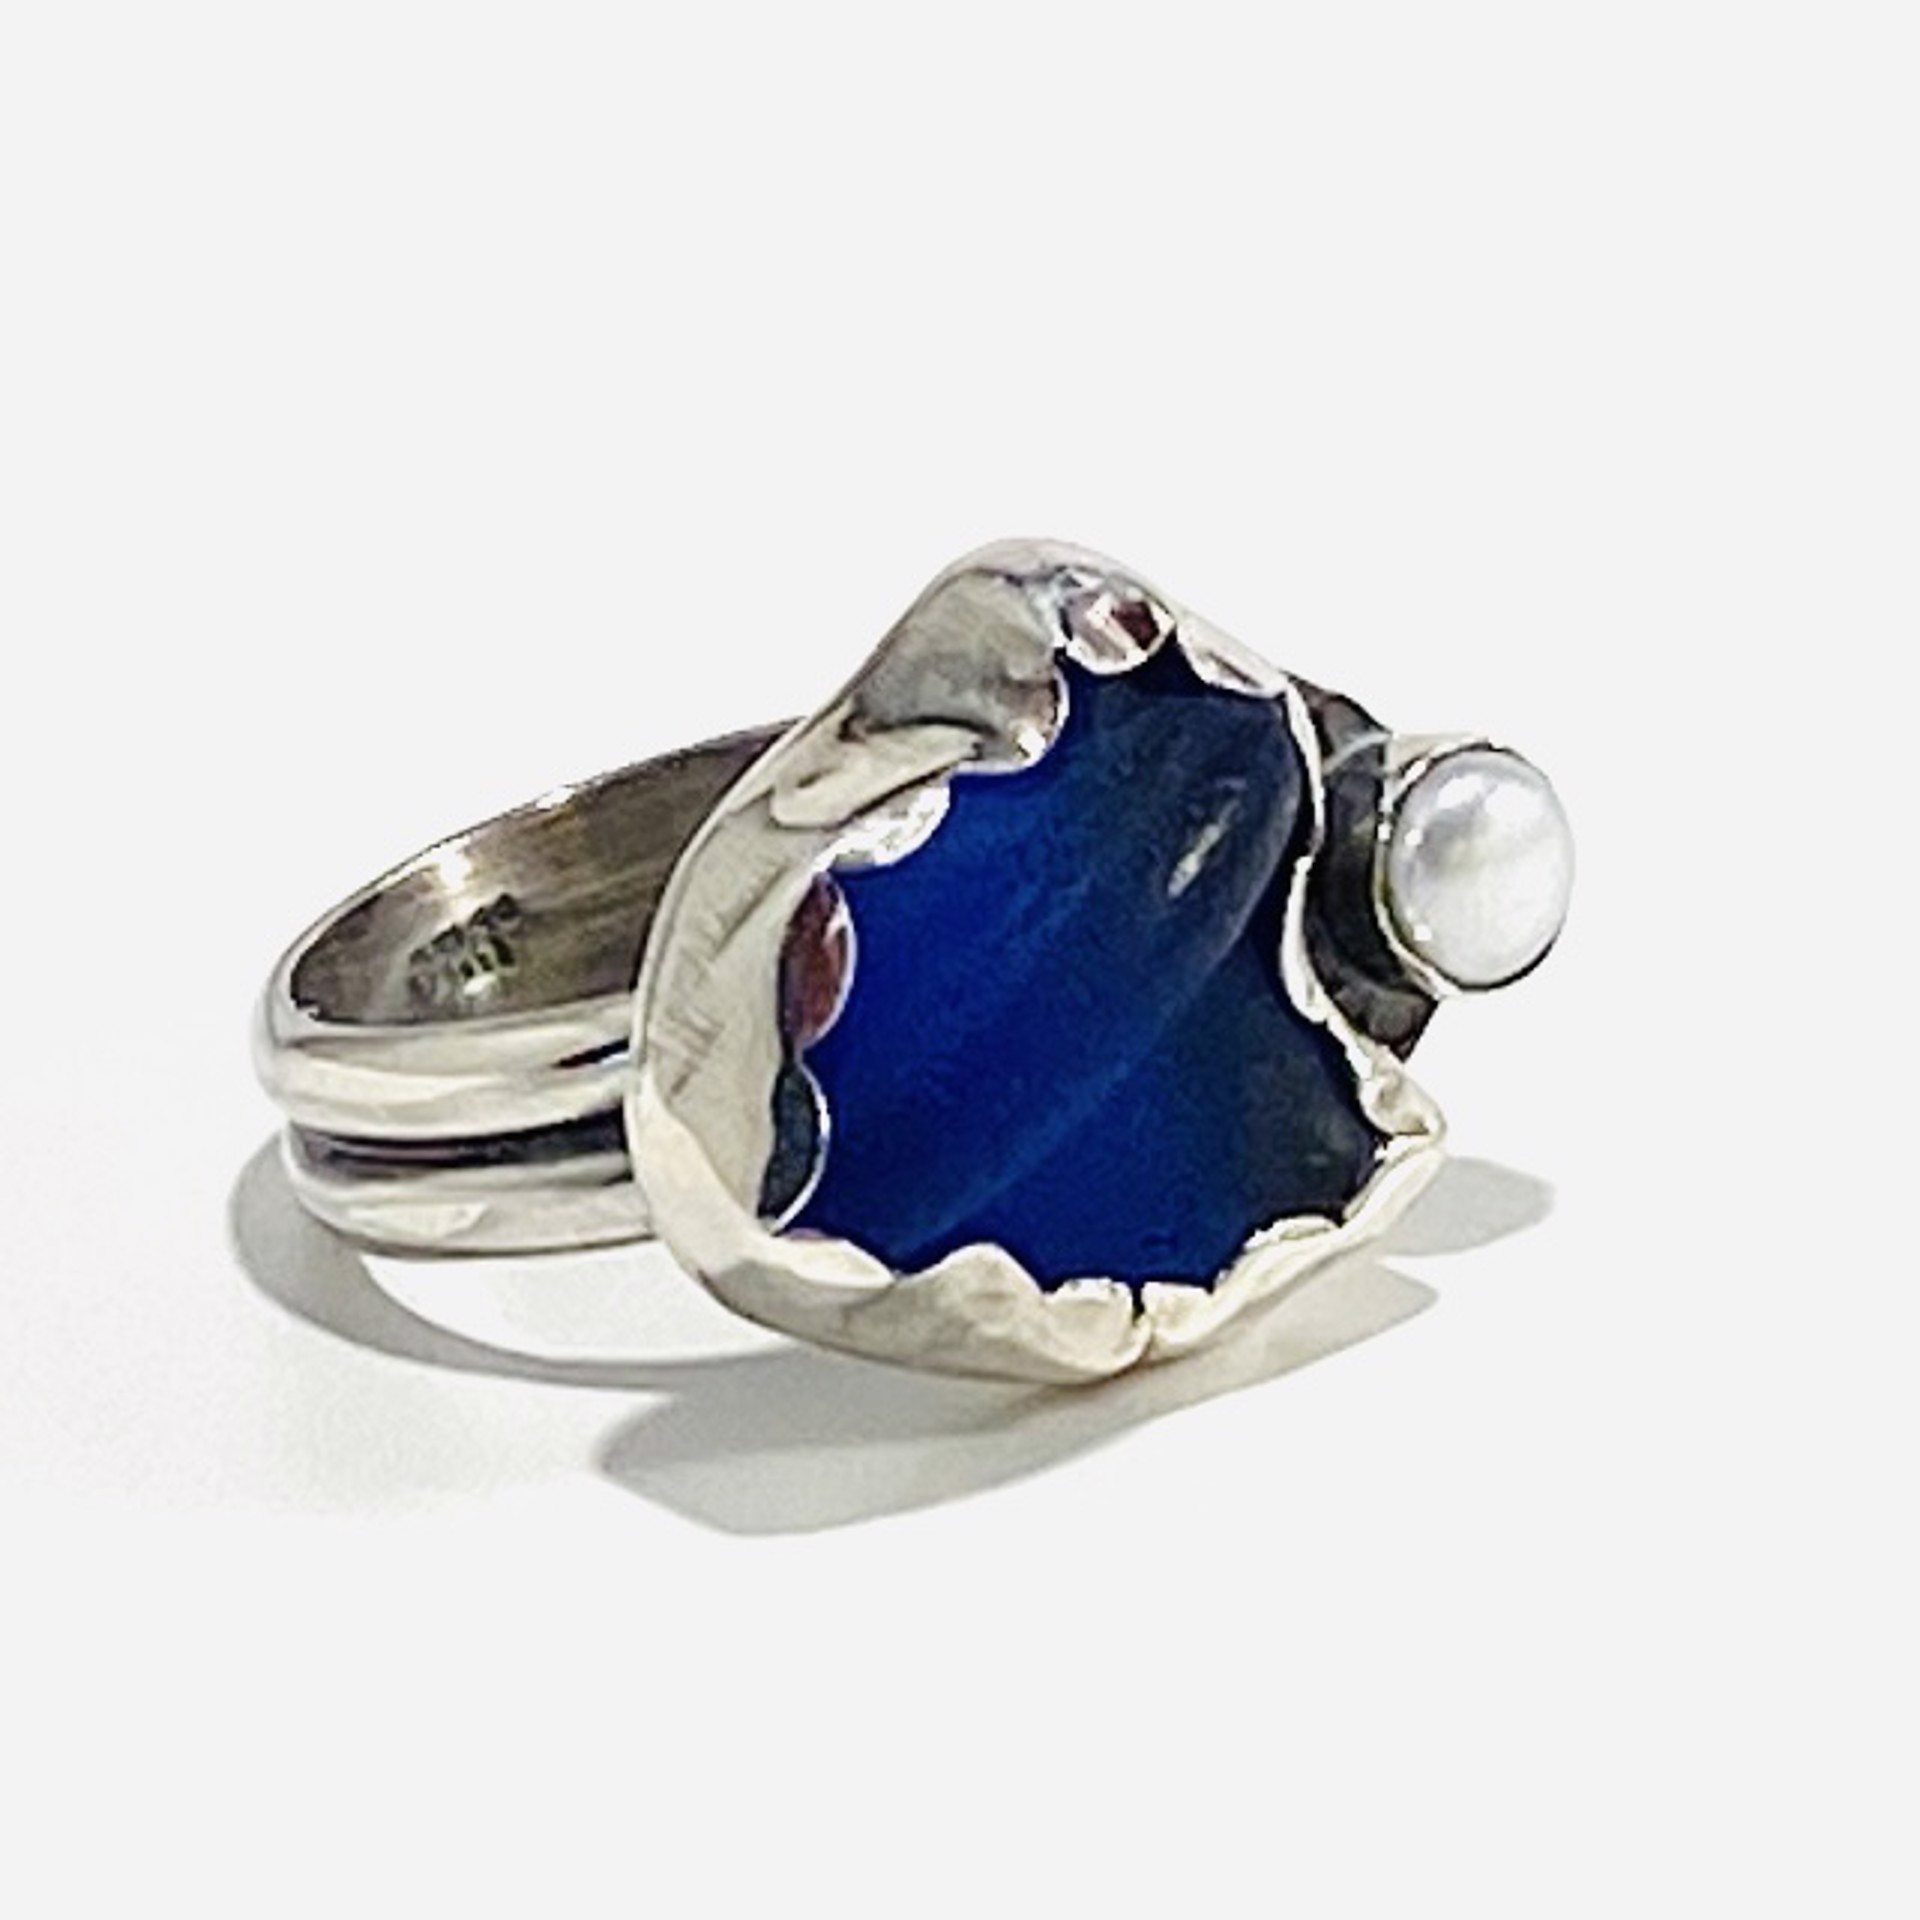 Dark Blue Sea Glass Pearl Accent Ring sz8 AB23-13 by Anne Bivens